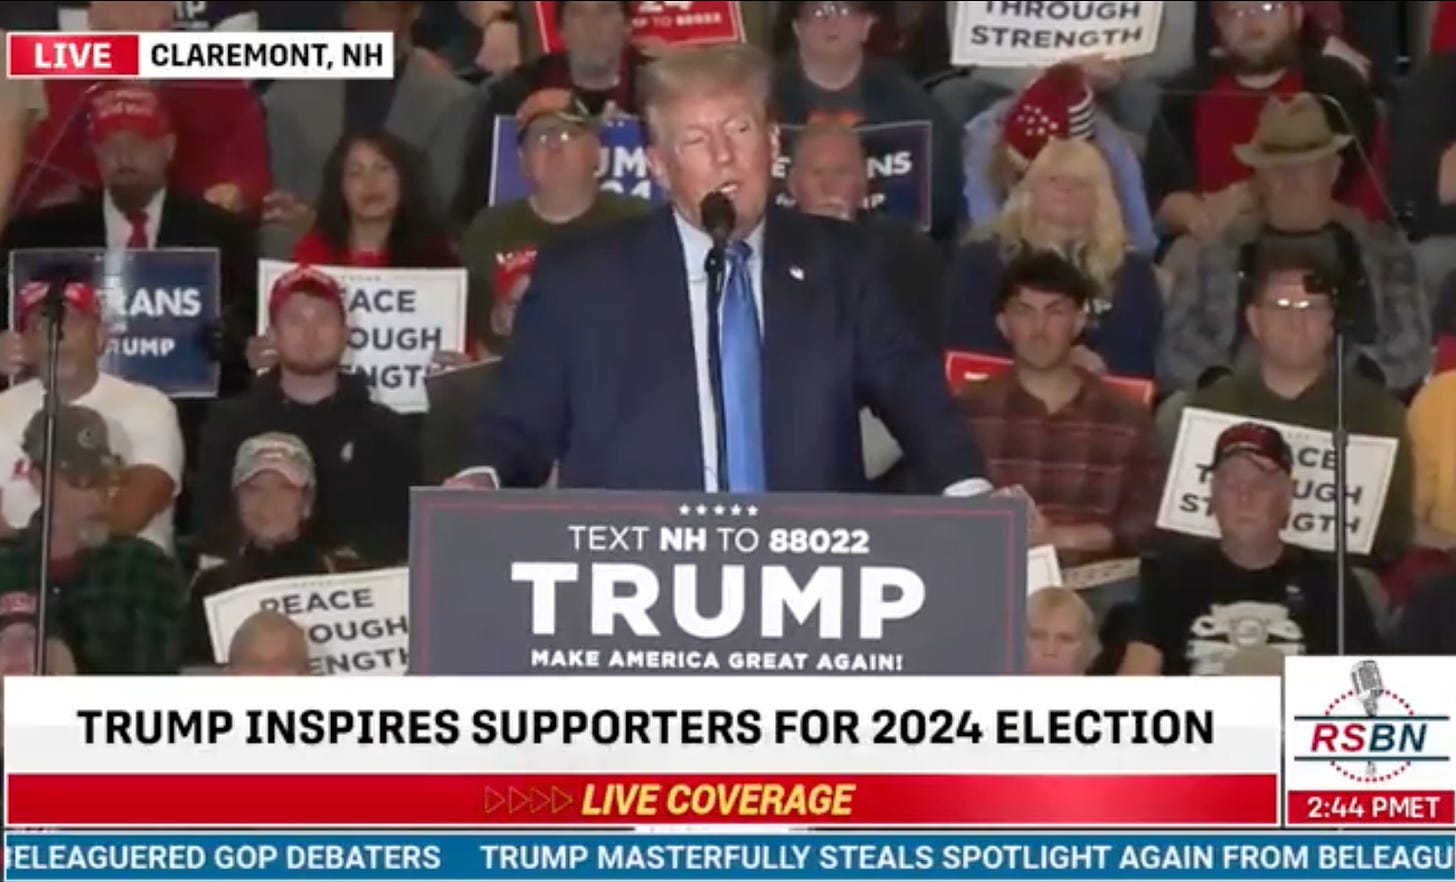 Trump gives speech in front of crowd of deeply homely people.